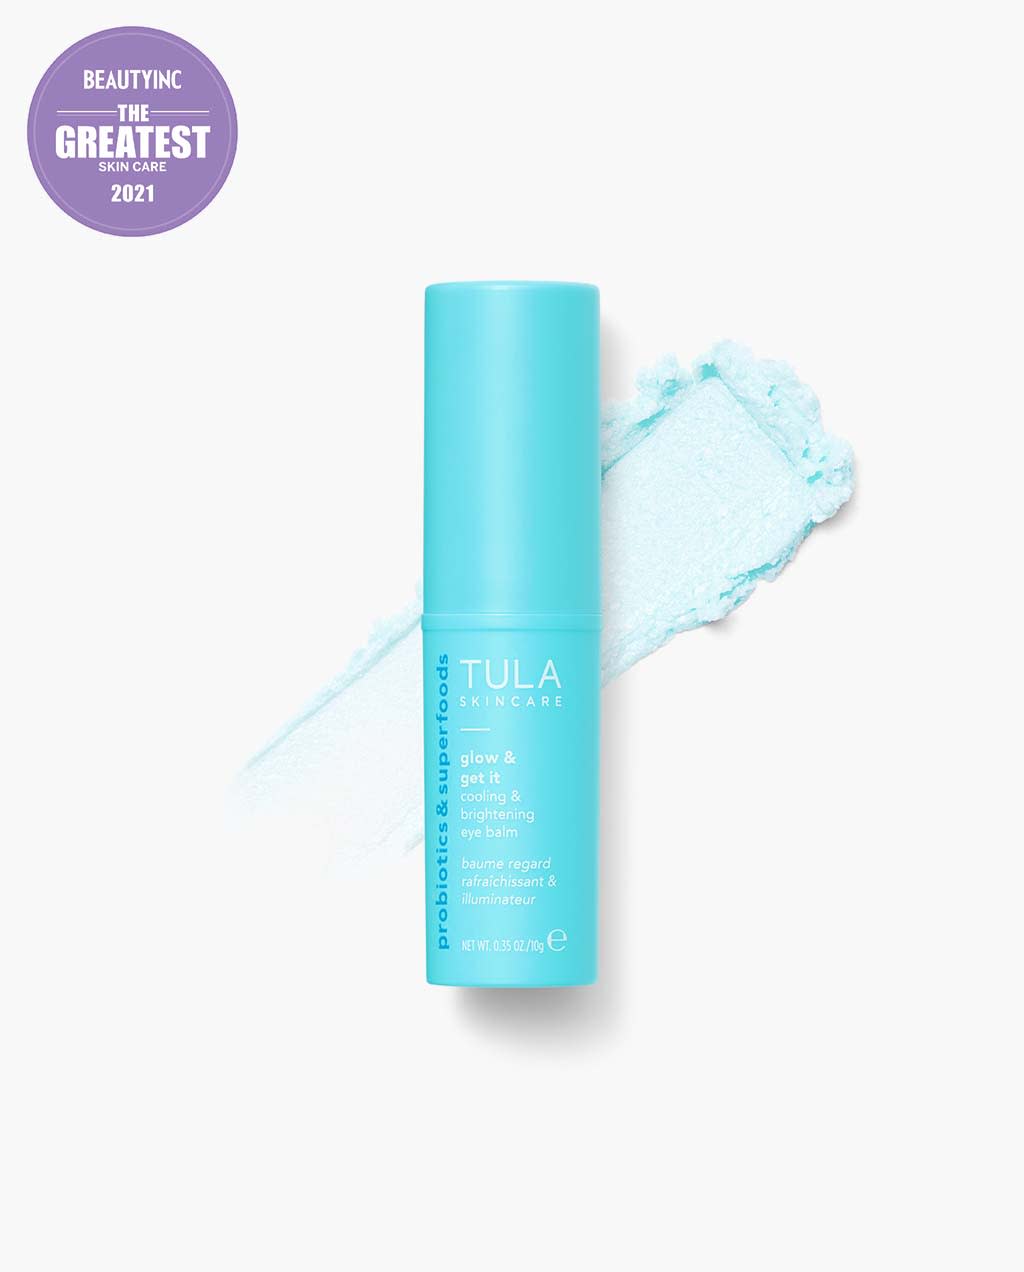 TULA Skin Care Glow & Get It Cooling & Brightening Eye Balm | Dark Circle Under Eye Treatment, Instantly Hydrate and Brighten Undereye Area, Portable and Perfect to Use On-the-go | 0.35 oz.